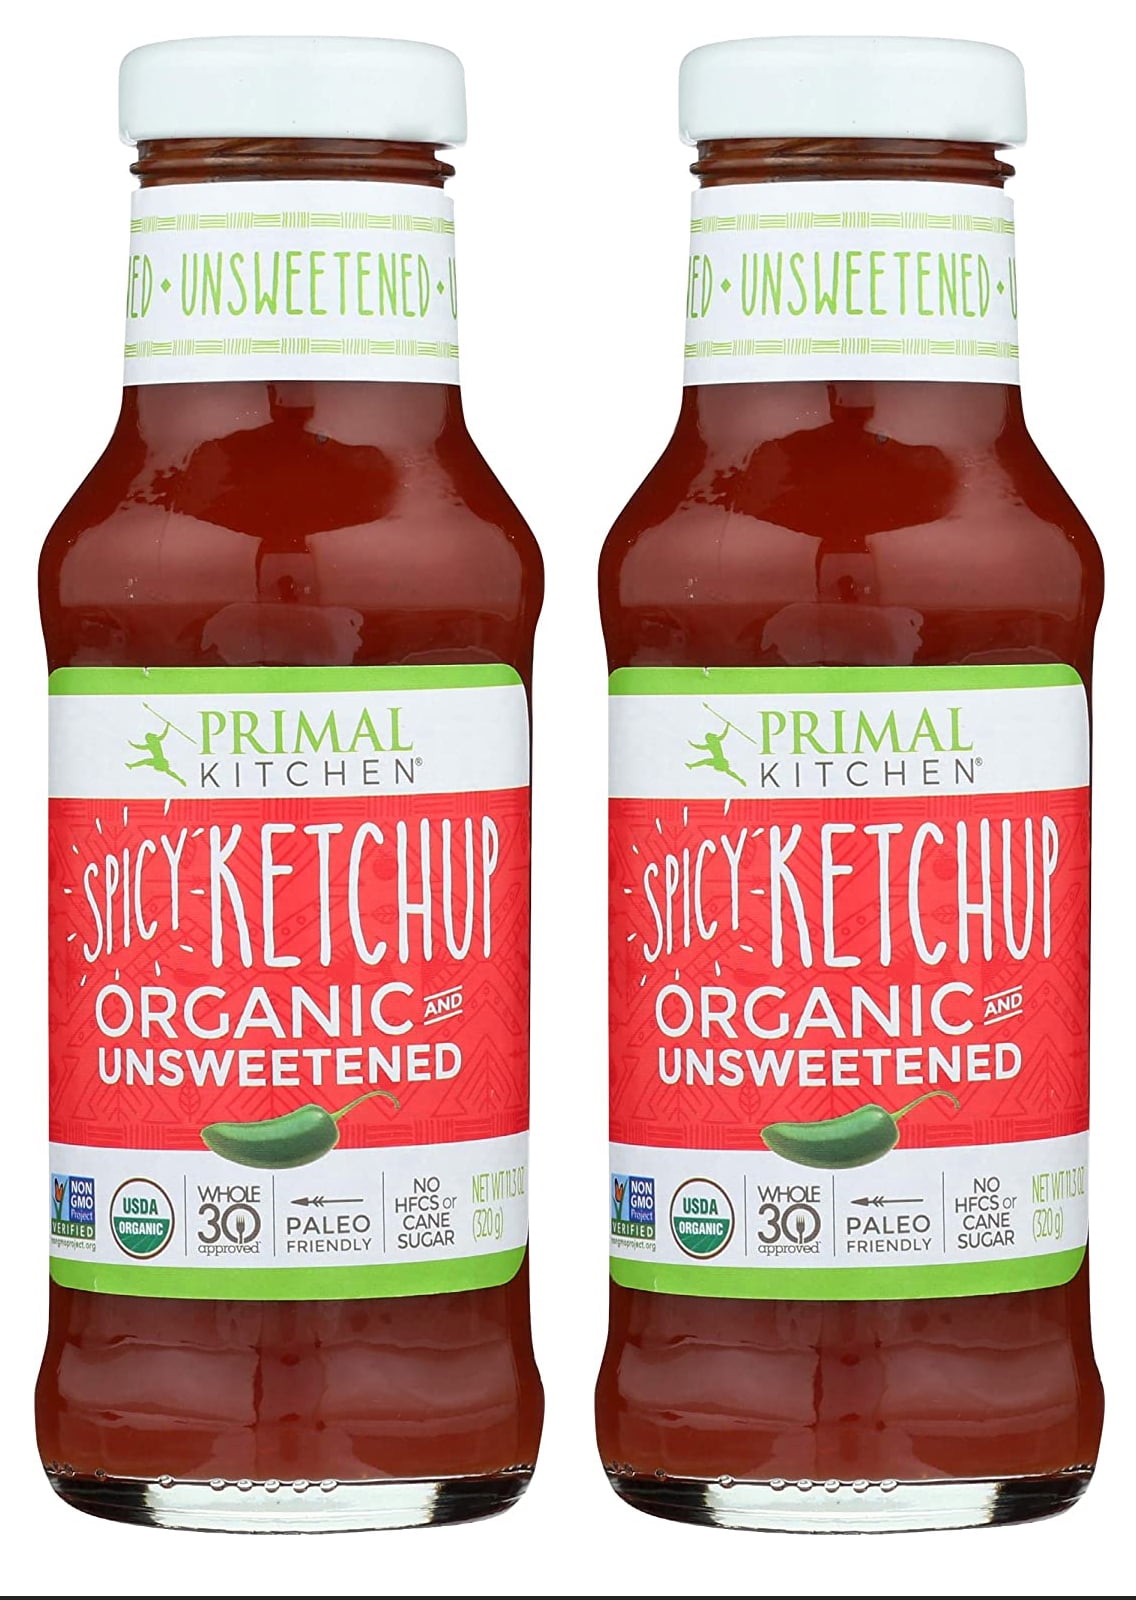 Primal Kitchen Spicy Ketchup Organic and Unsweetened 11.3 Ounce | 2 ...